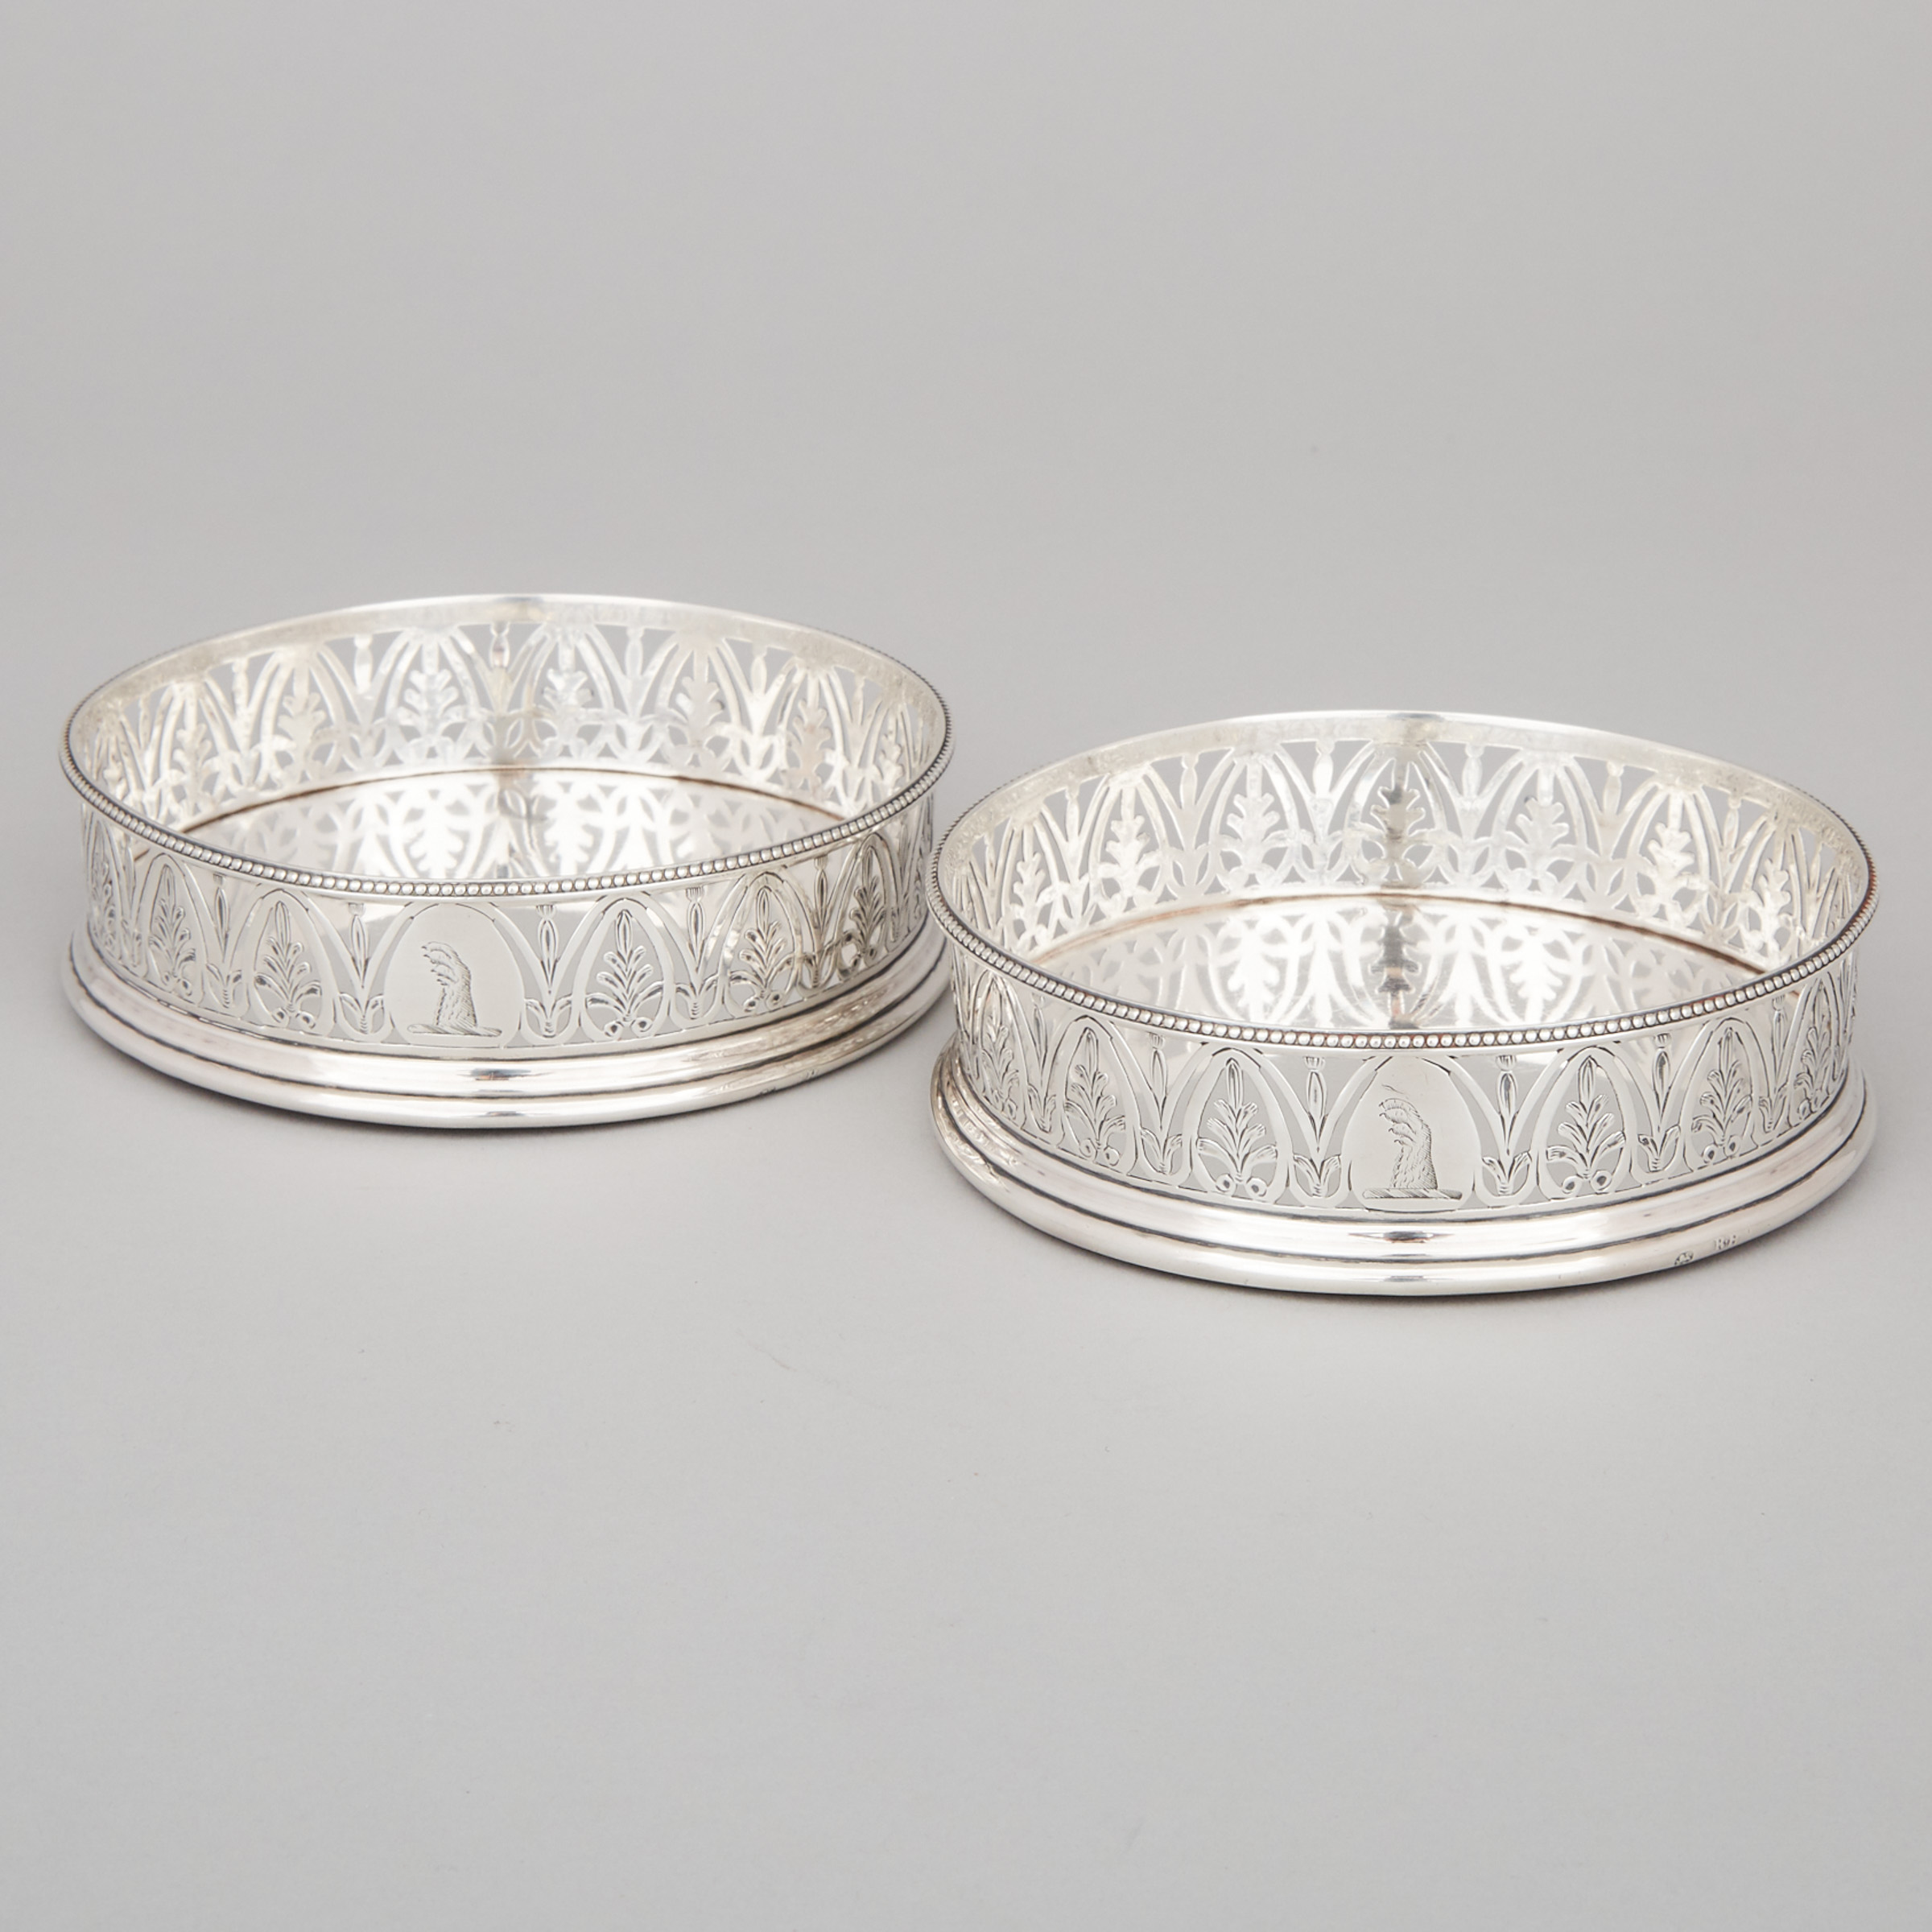 Pair of George III Silver Wine Coasters, Robert Hennell I, London, c.1780